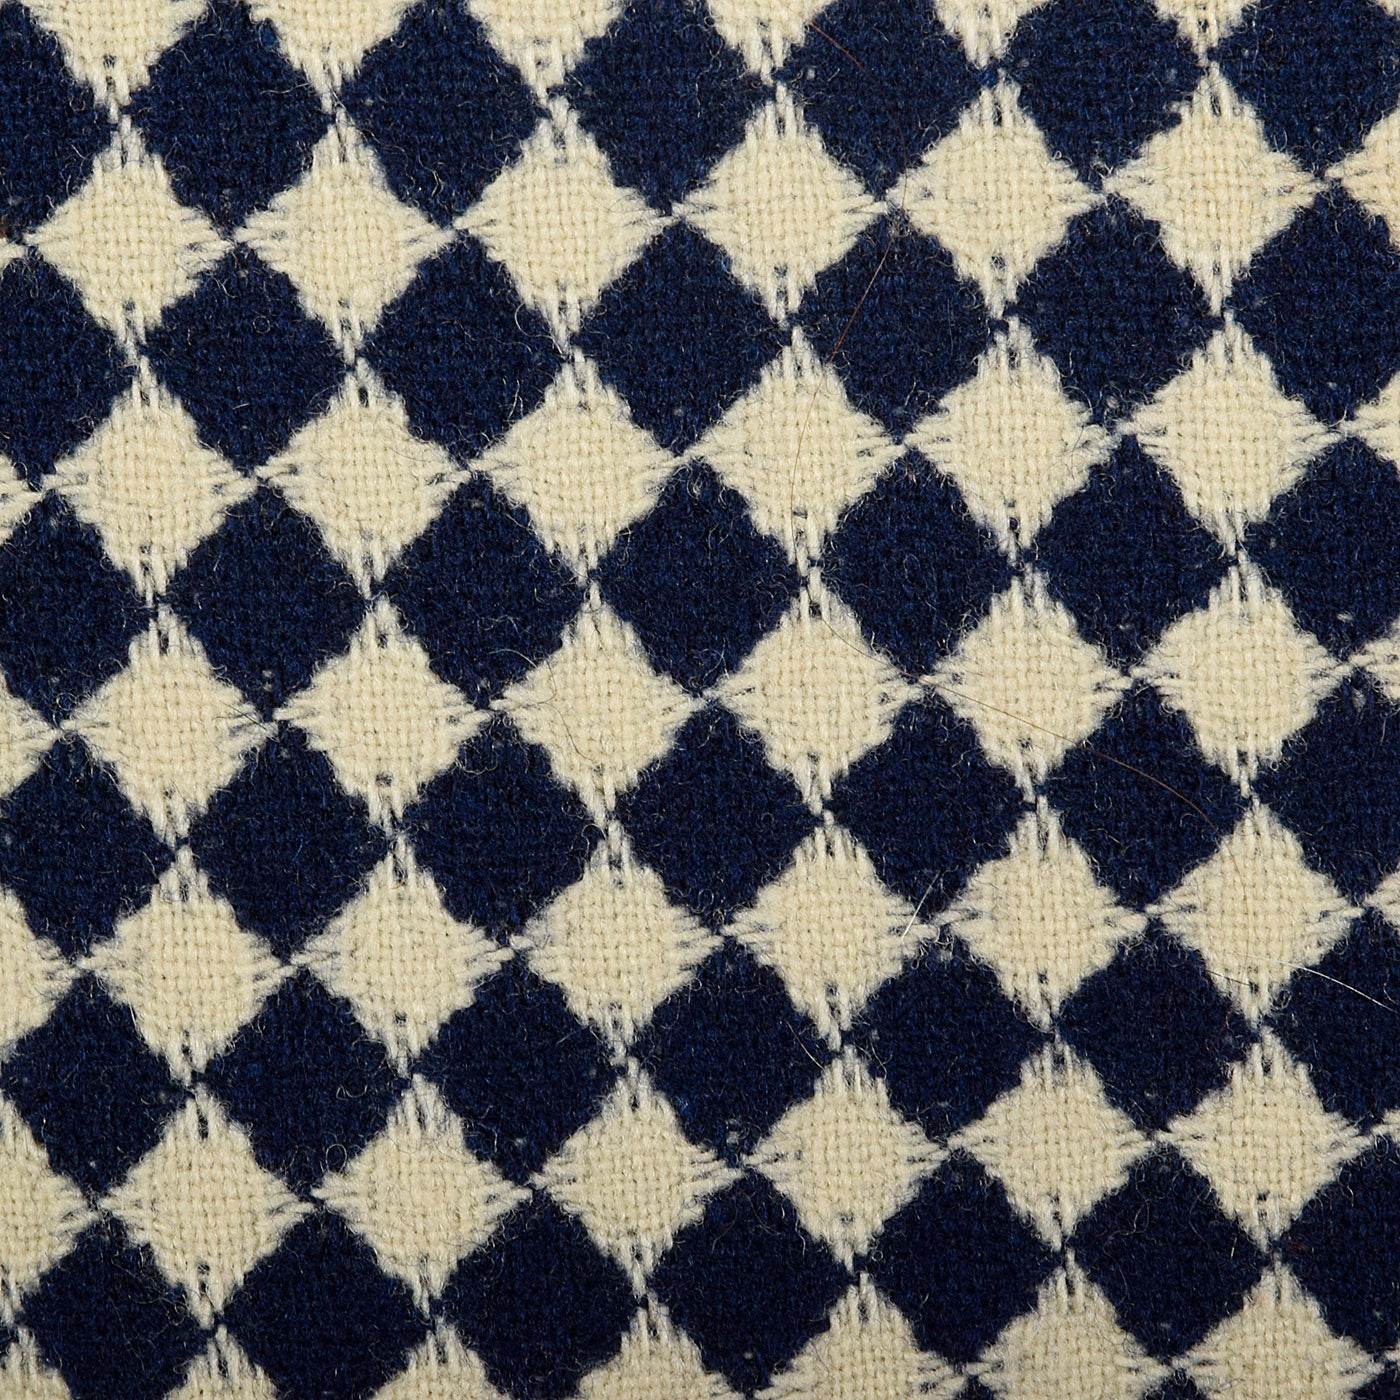 1950s Navy Blue and White Check Jacket